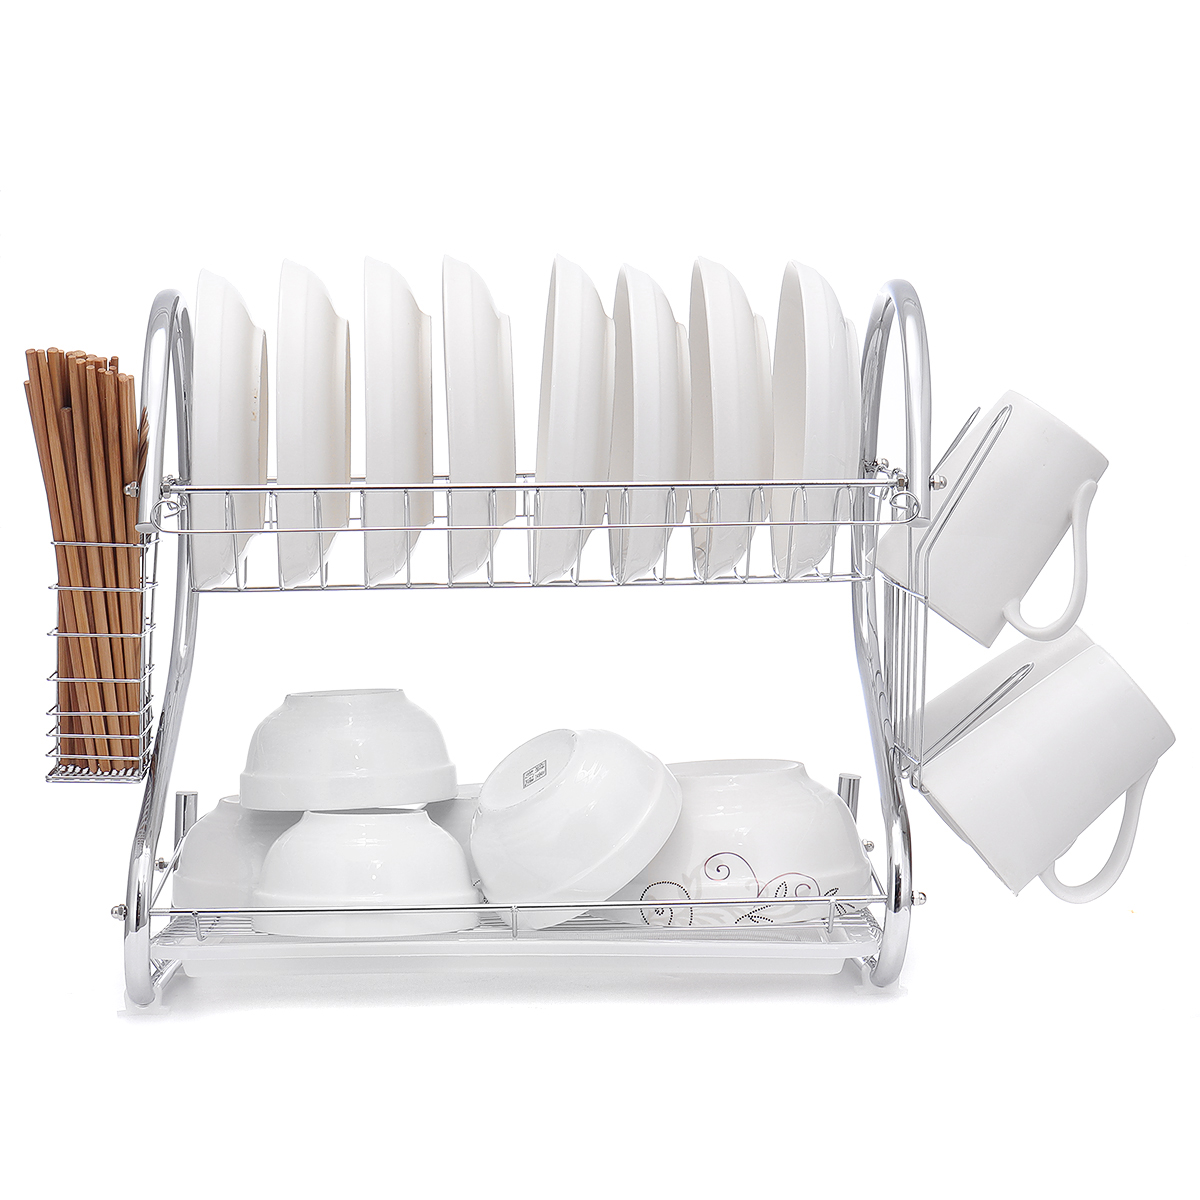 Dish-Drying-Rack-2-Tier-Dish-Rack-with-Utensil-Holder-Cup-Holder-and-Dish-Drainer-for-Kitchen-Counte-1665917-4